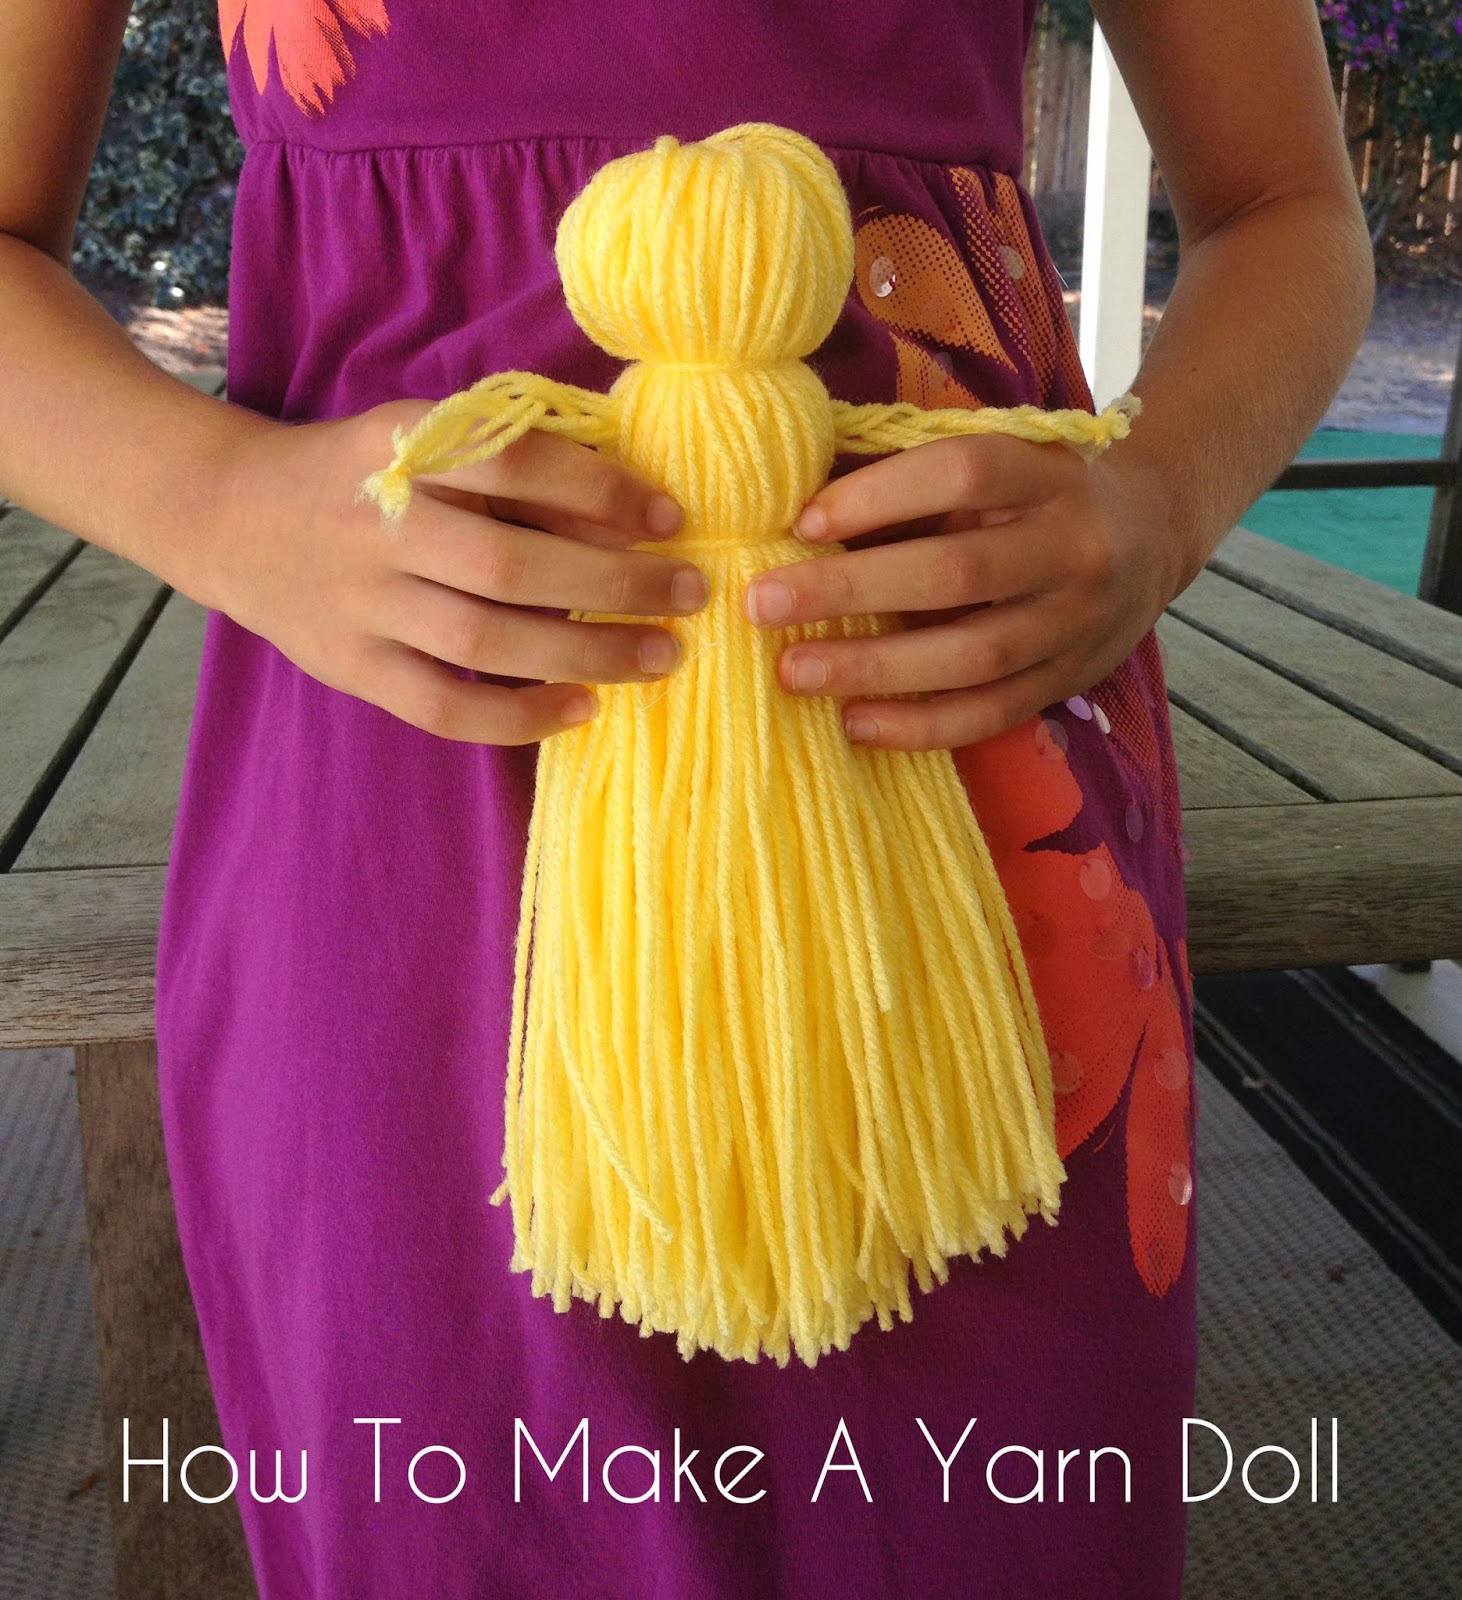 Be Brave, Keep Going: How To Make A Yarn Doll - Easy Yarn Doll Tutorial